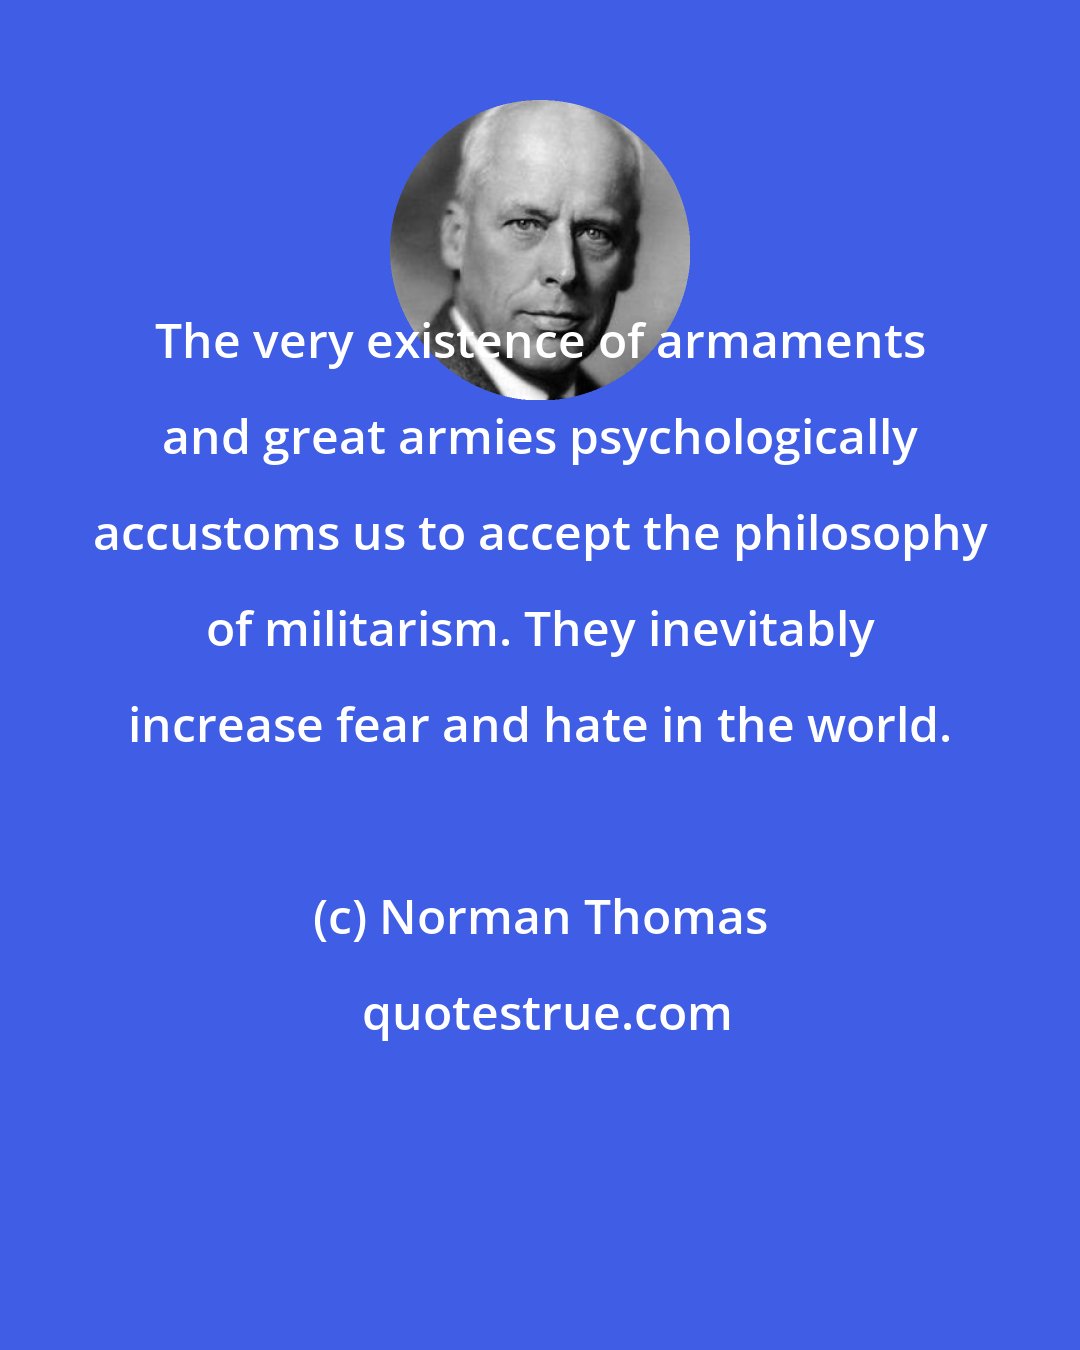 Norman Thomas: The very existence of armaments and great armies psychologically accustoms us to accept the philosophy of militarism. They inevitably increase fear and hate in the world.